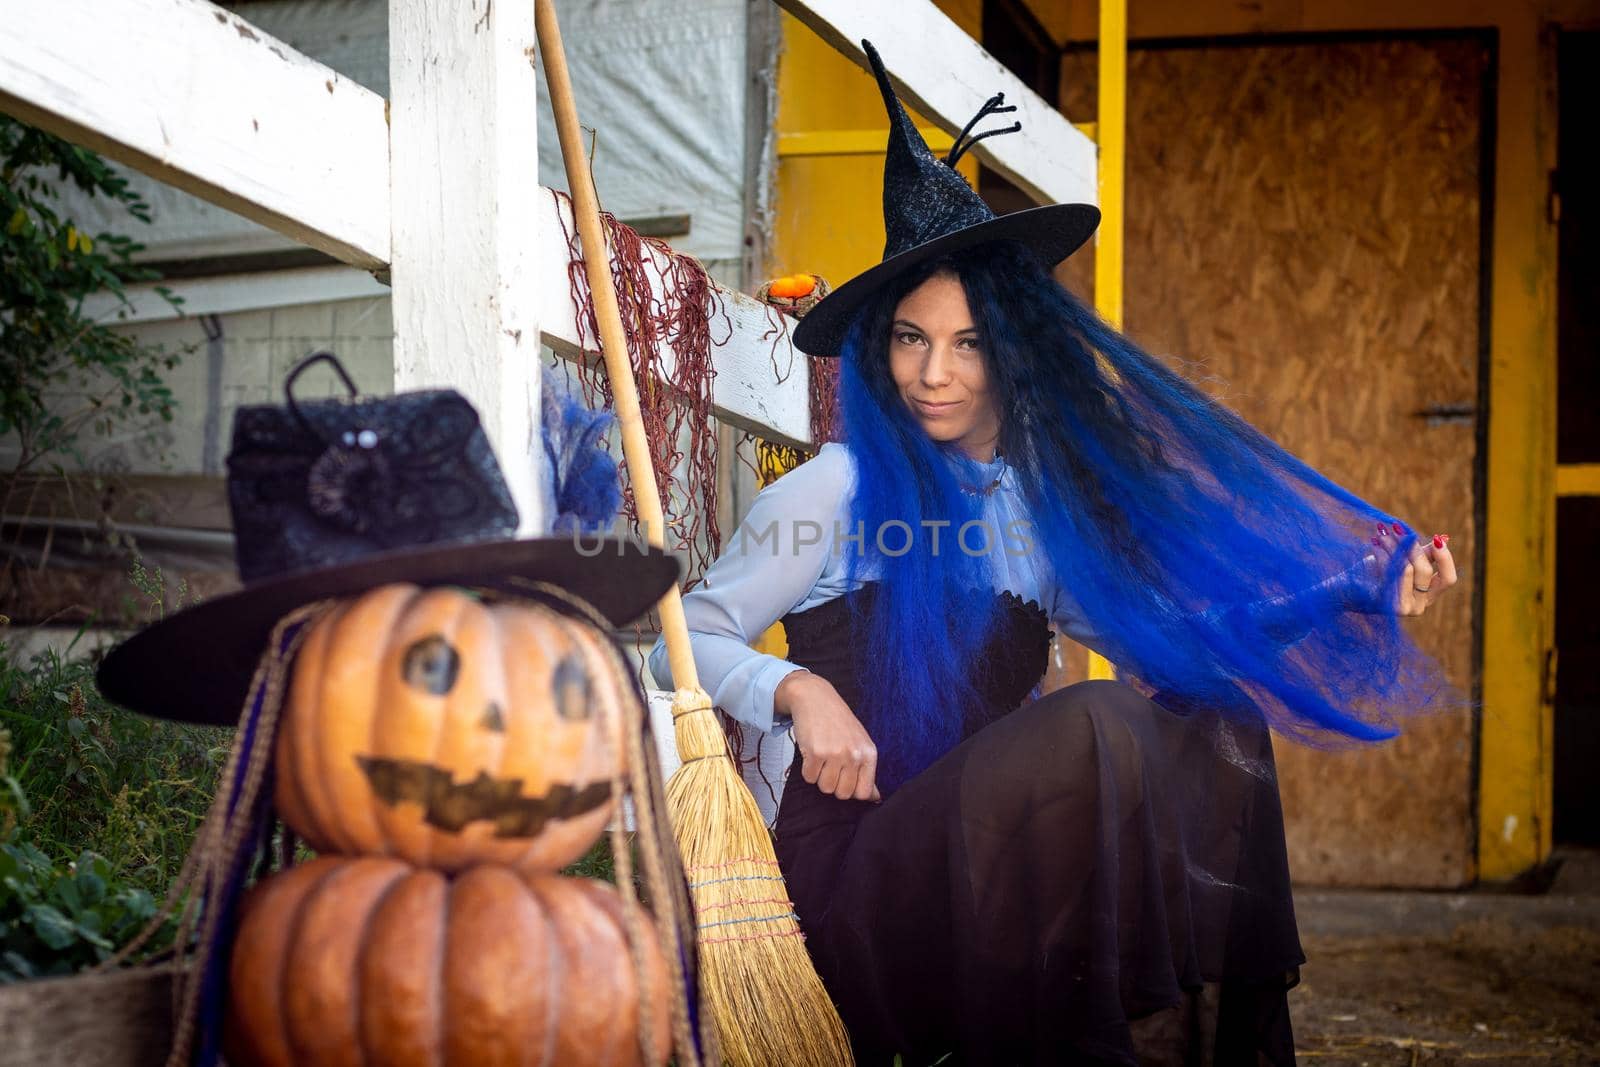 A witch with blue hair sits by the fence next to an evil pumpkin figure